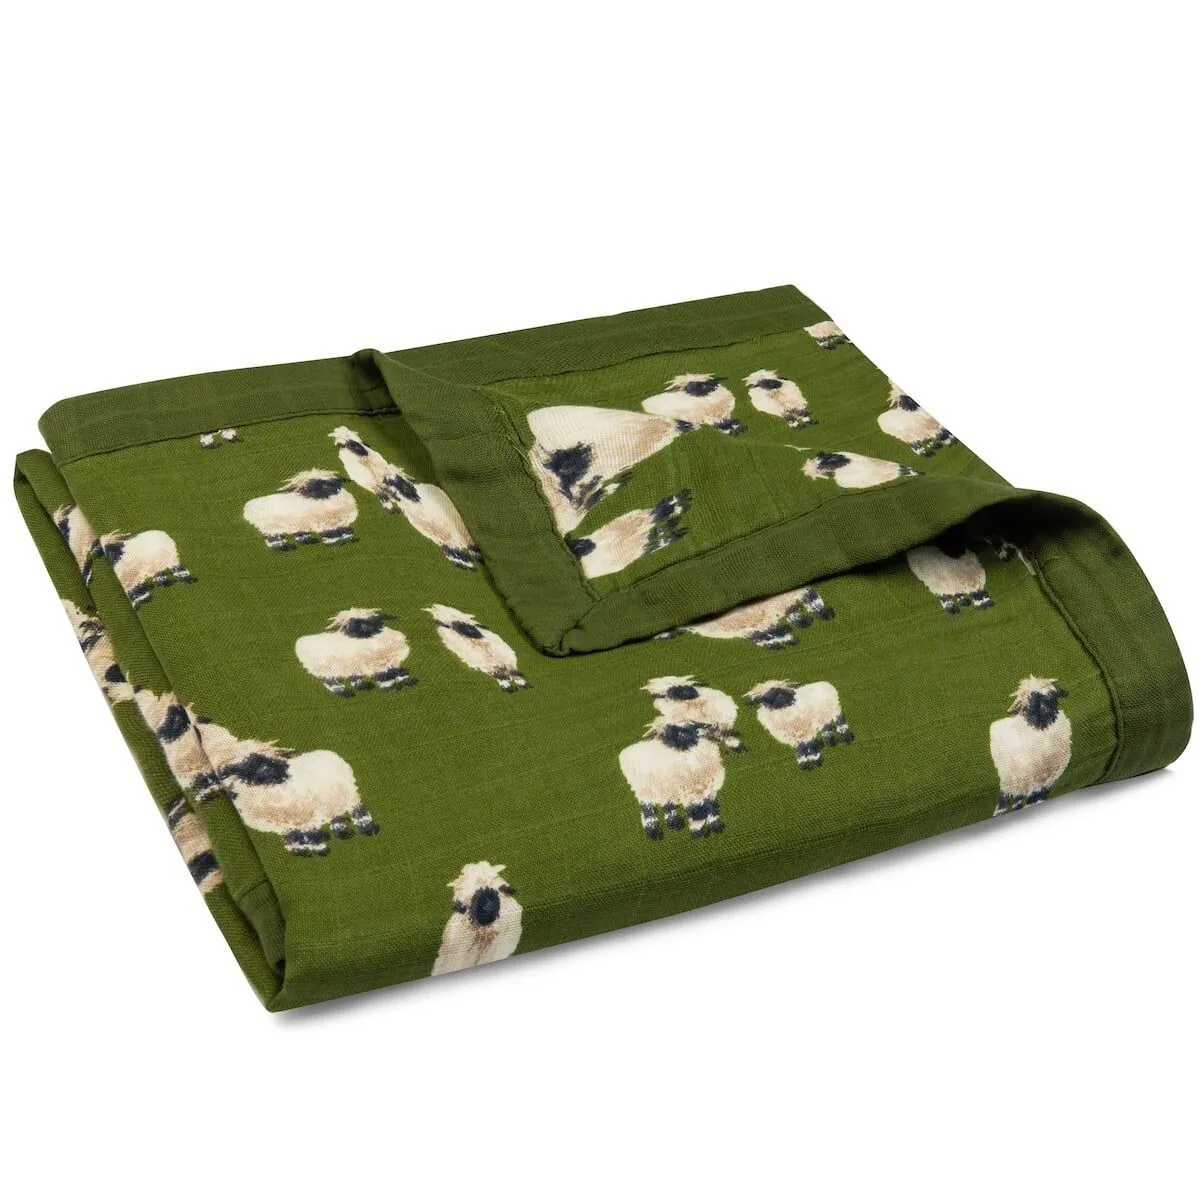 Valais Sheep Big Lovey Blanket - Heart of the Home LV